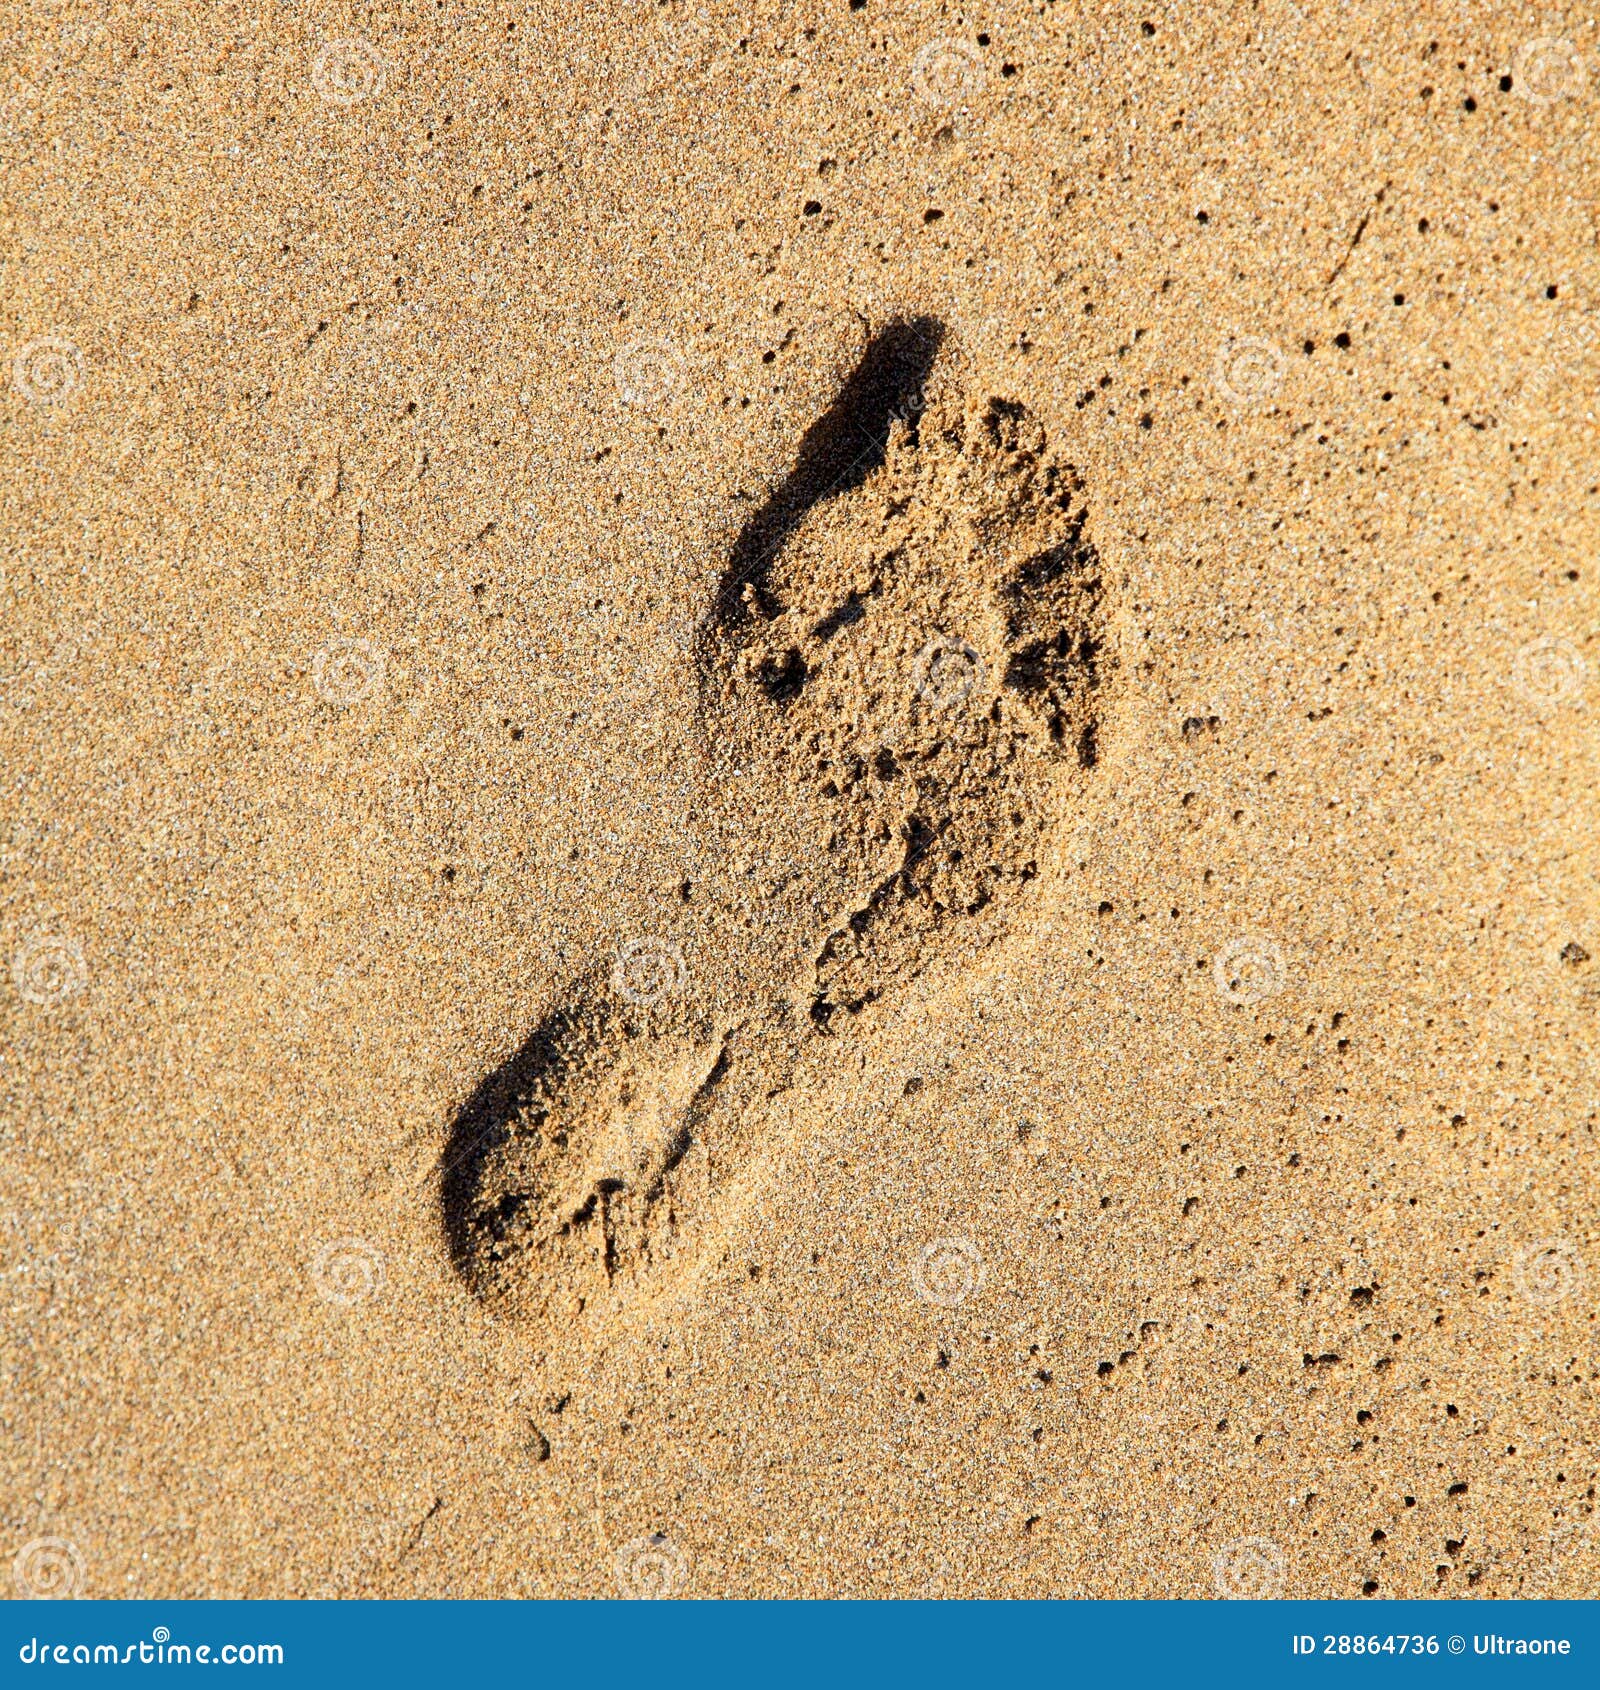 Footprint in the sand. stock photo. Image of color, closeup - 28864736